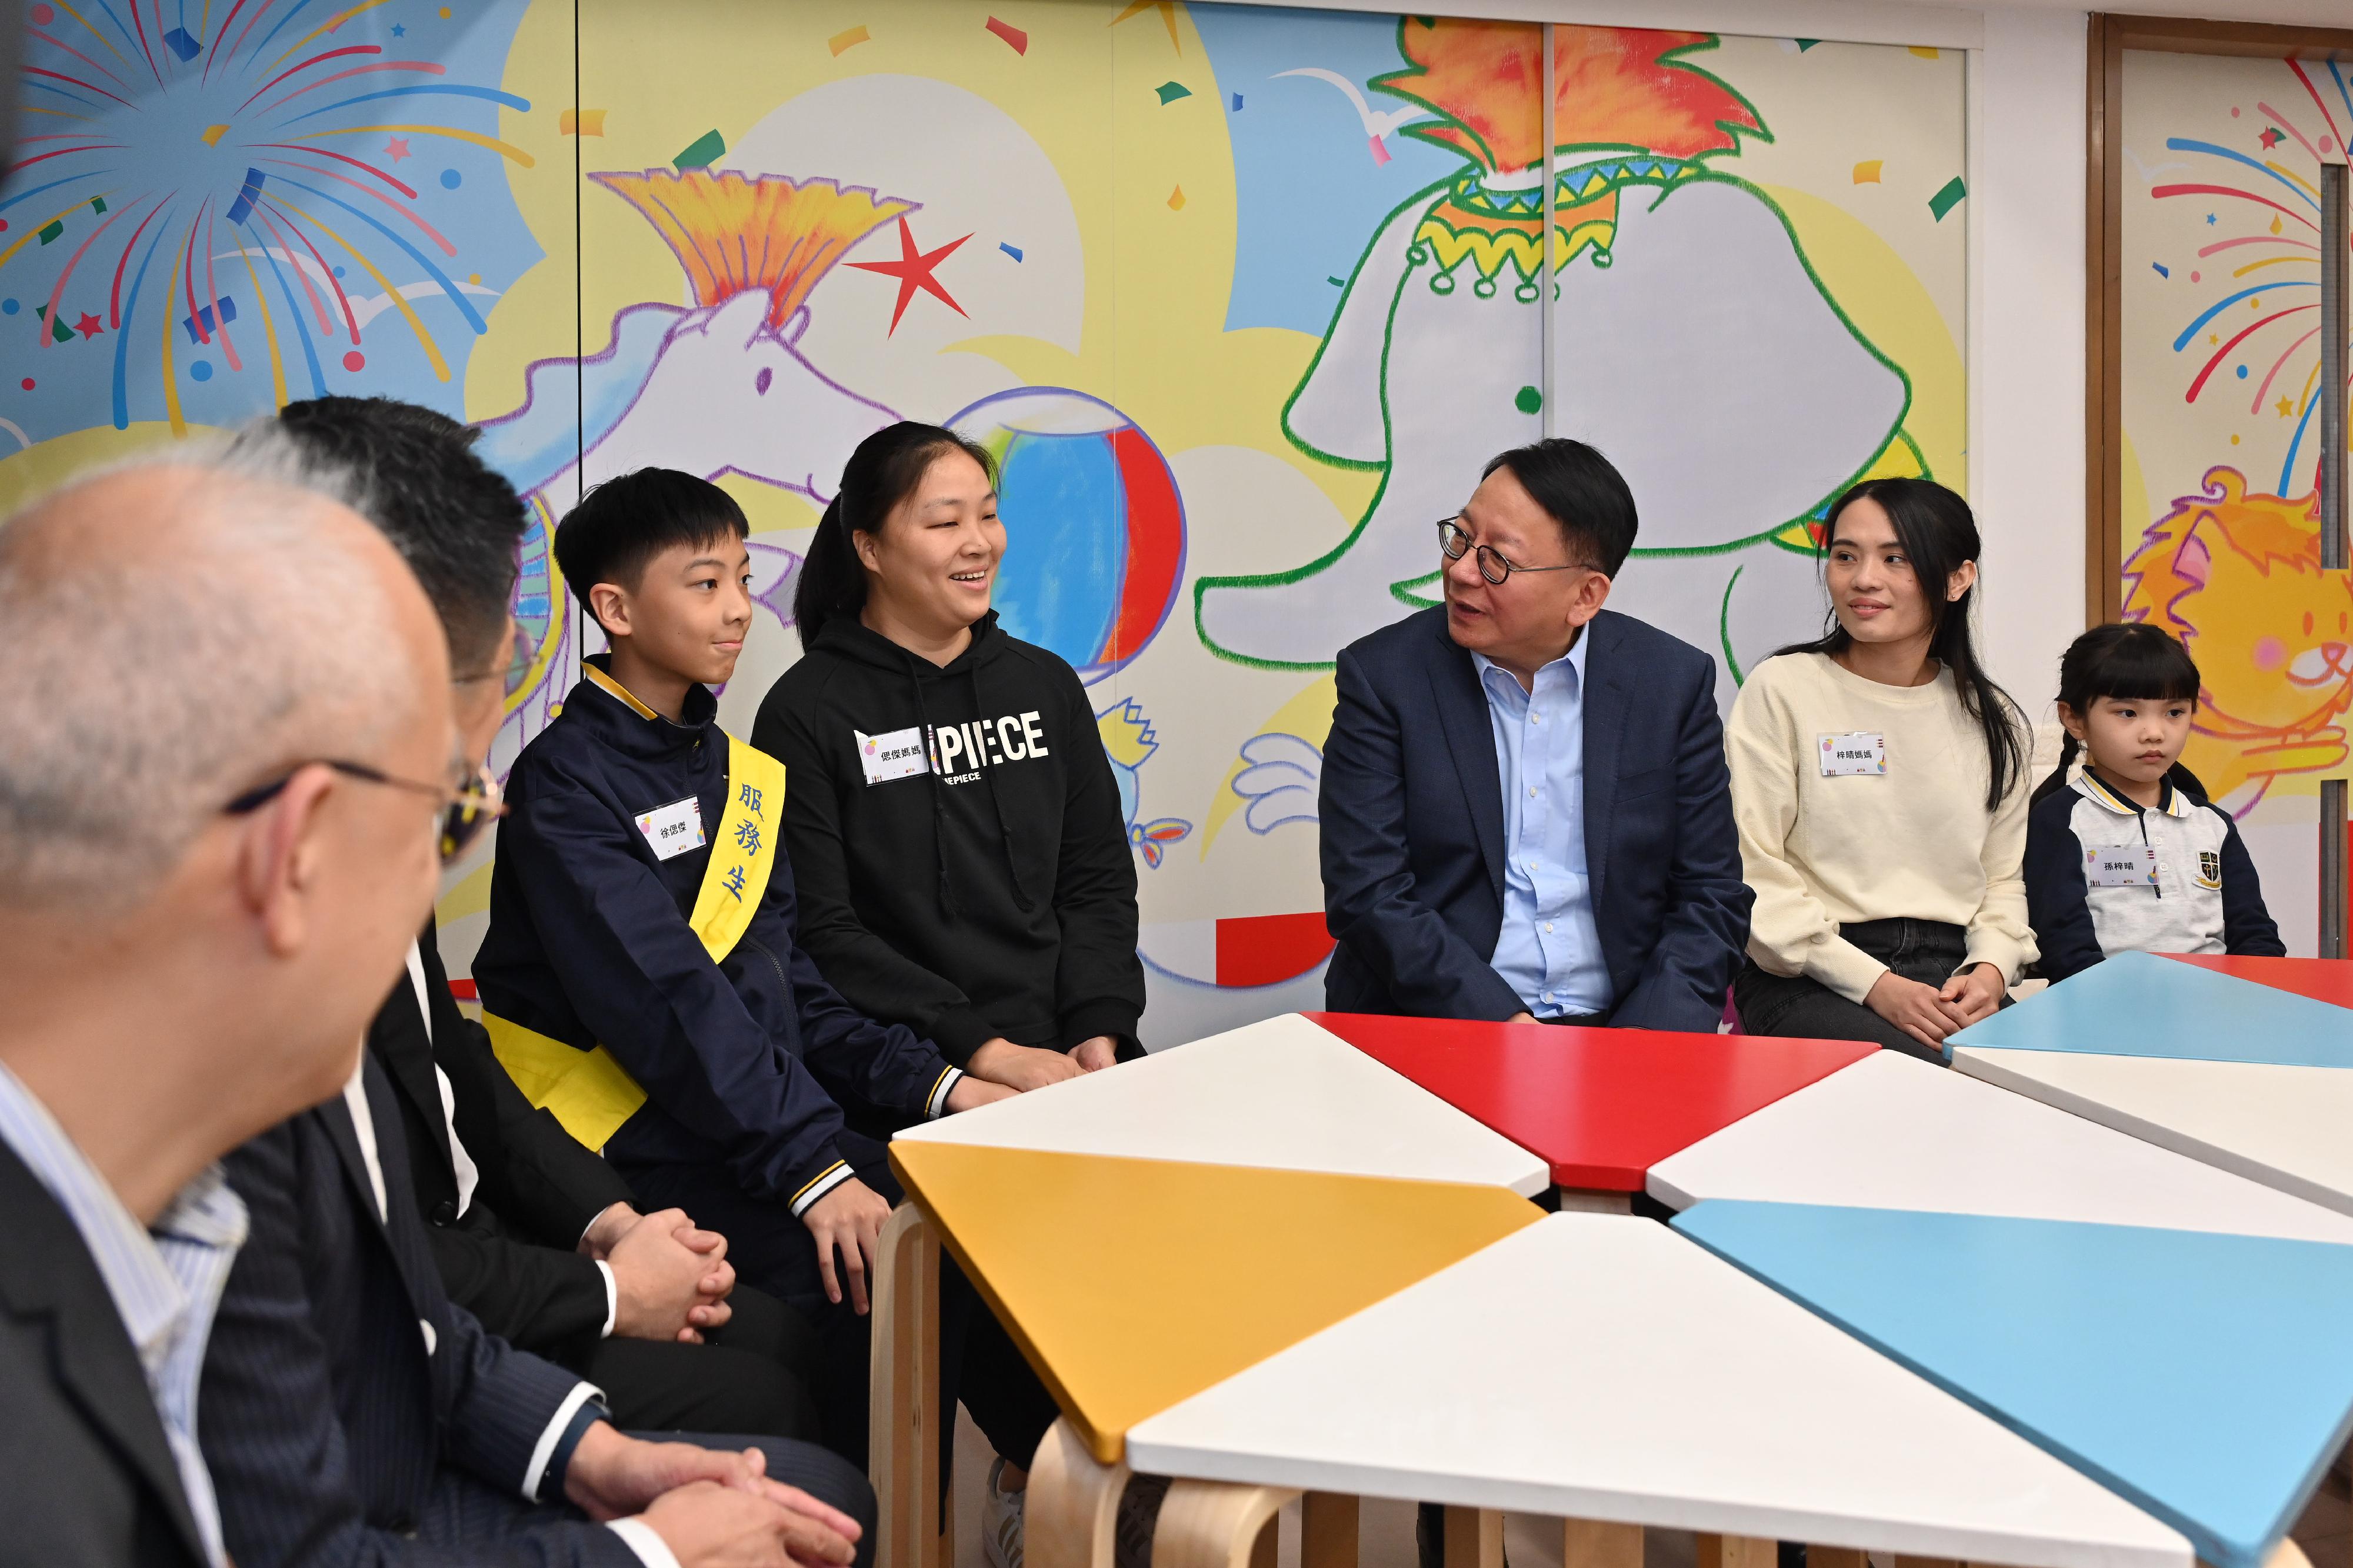 The Chief Secretary for Administration, Mr Chan Kwok-ki, today (December 7) visited SKH St Andrew's Primary School in Sham Shui Po to learn more about the implementation of the School-based After School Care Service Scheme. The Secretary for Labour and Welfare, Mr Chris Sun, and the Acting Secretary for Education, Mr Sze Chun-fai, also joined the visit. Photo shows Mr Chan (third right) chatting with students and parents, noting that they had rejoined the labour market.